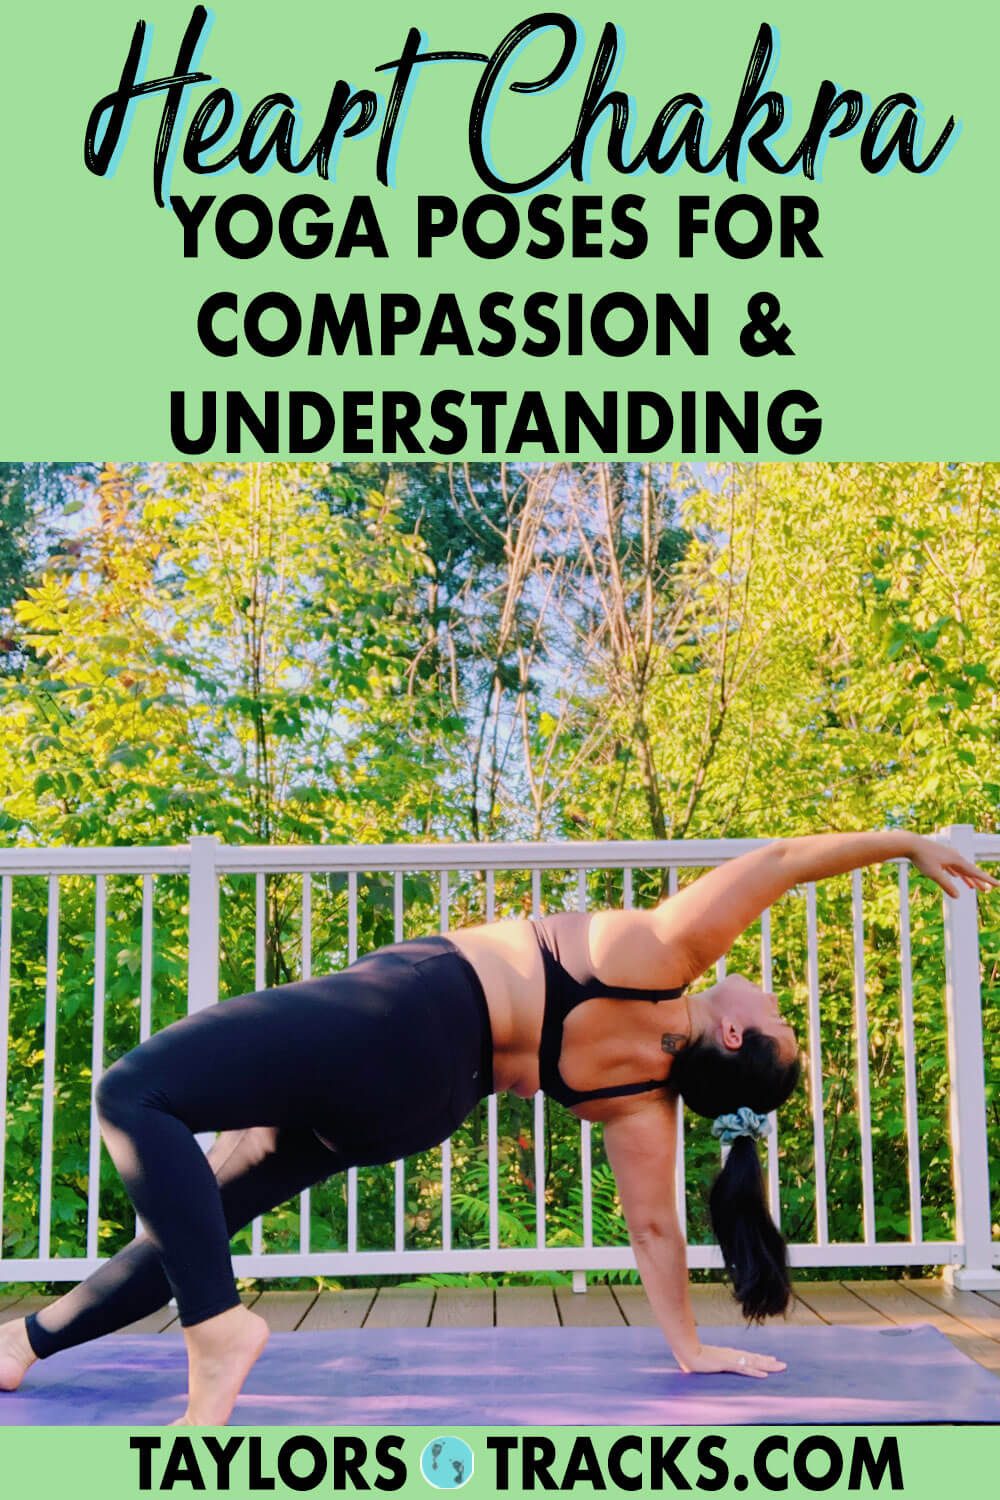 5 Best Heart Chakra Yoga Poses for Compassion & Understanding